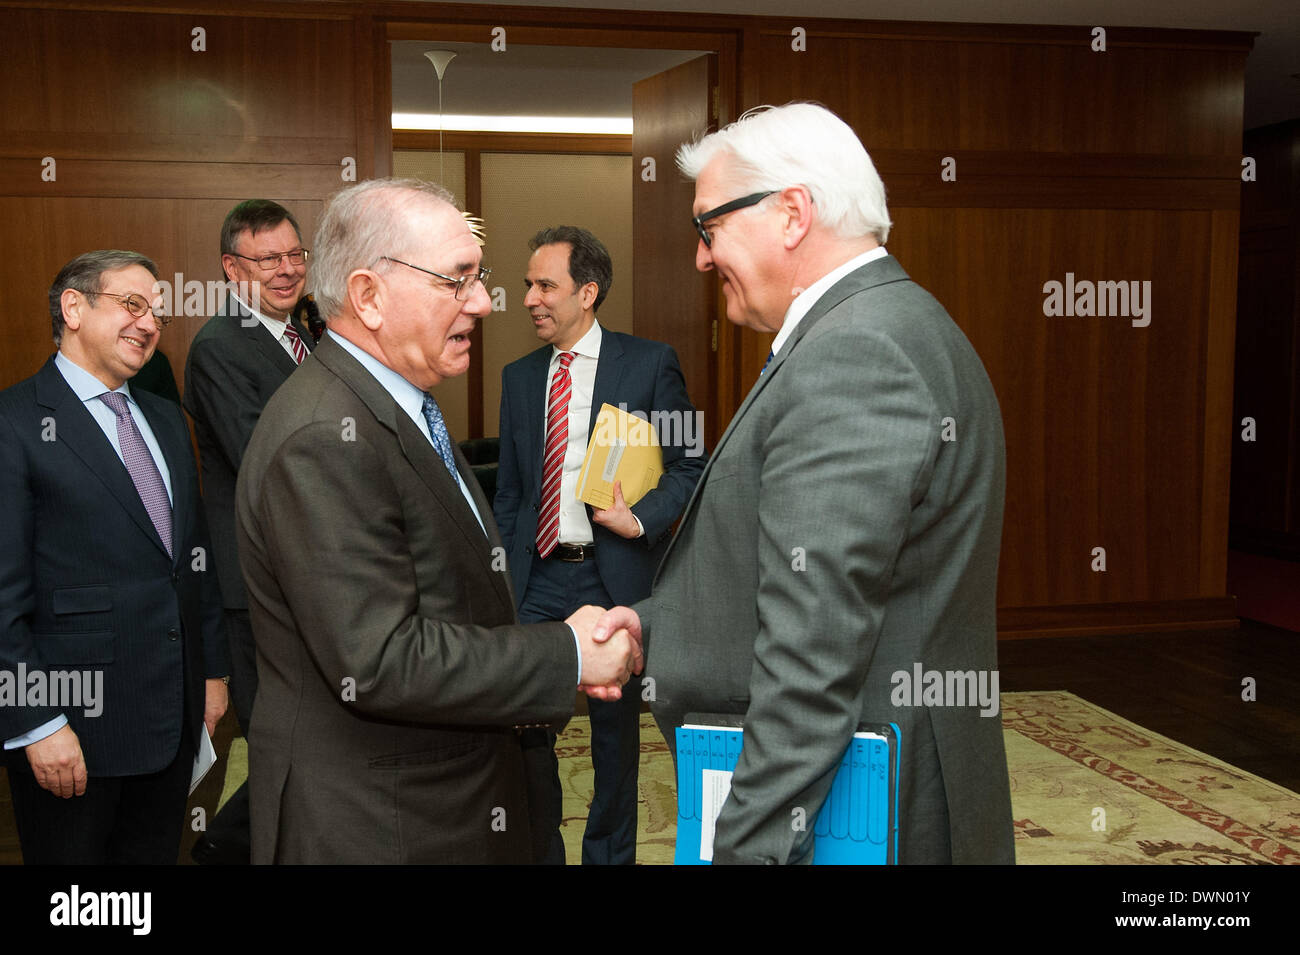 Berlin, Germany. 10th Mar, 2014. Meeting between German Minister of Foreign Affairs, Dr. Frank-Walter Steinmeier and Portuguese Foreign Minister, Dr. Rui Machete for bilateral discussion at the Ministry of Foreign Affairs in Berlin, on March 10, 2014. © Goncalo Silva/NurPhoto/ZUMAPRESS.com/Alamy Live News Stock Photo